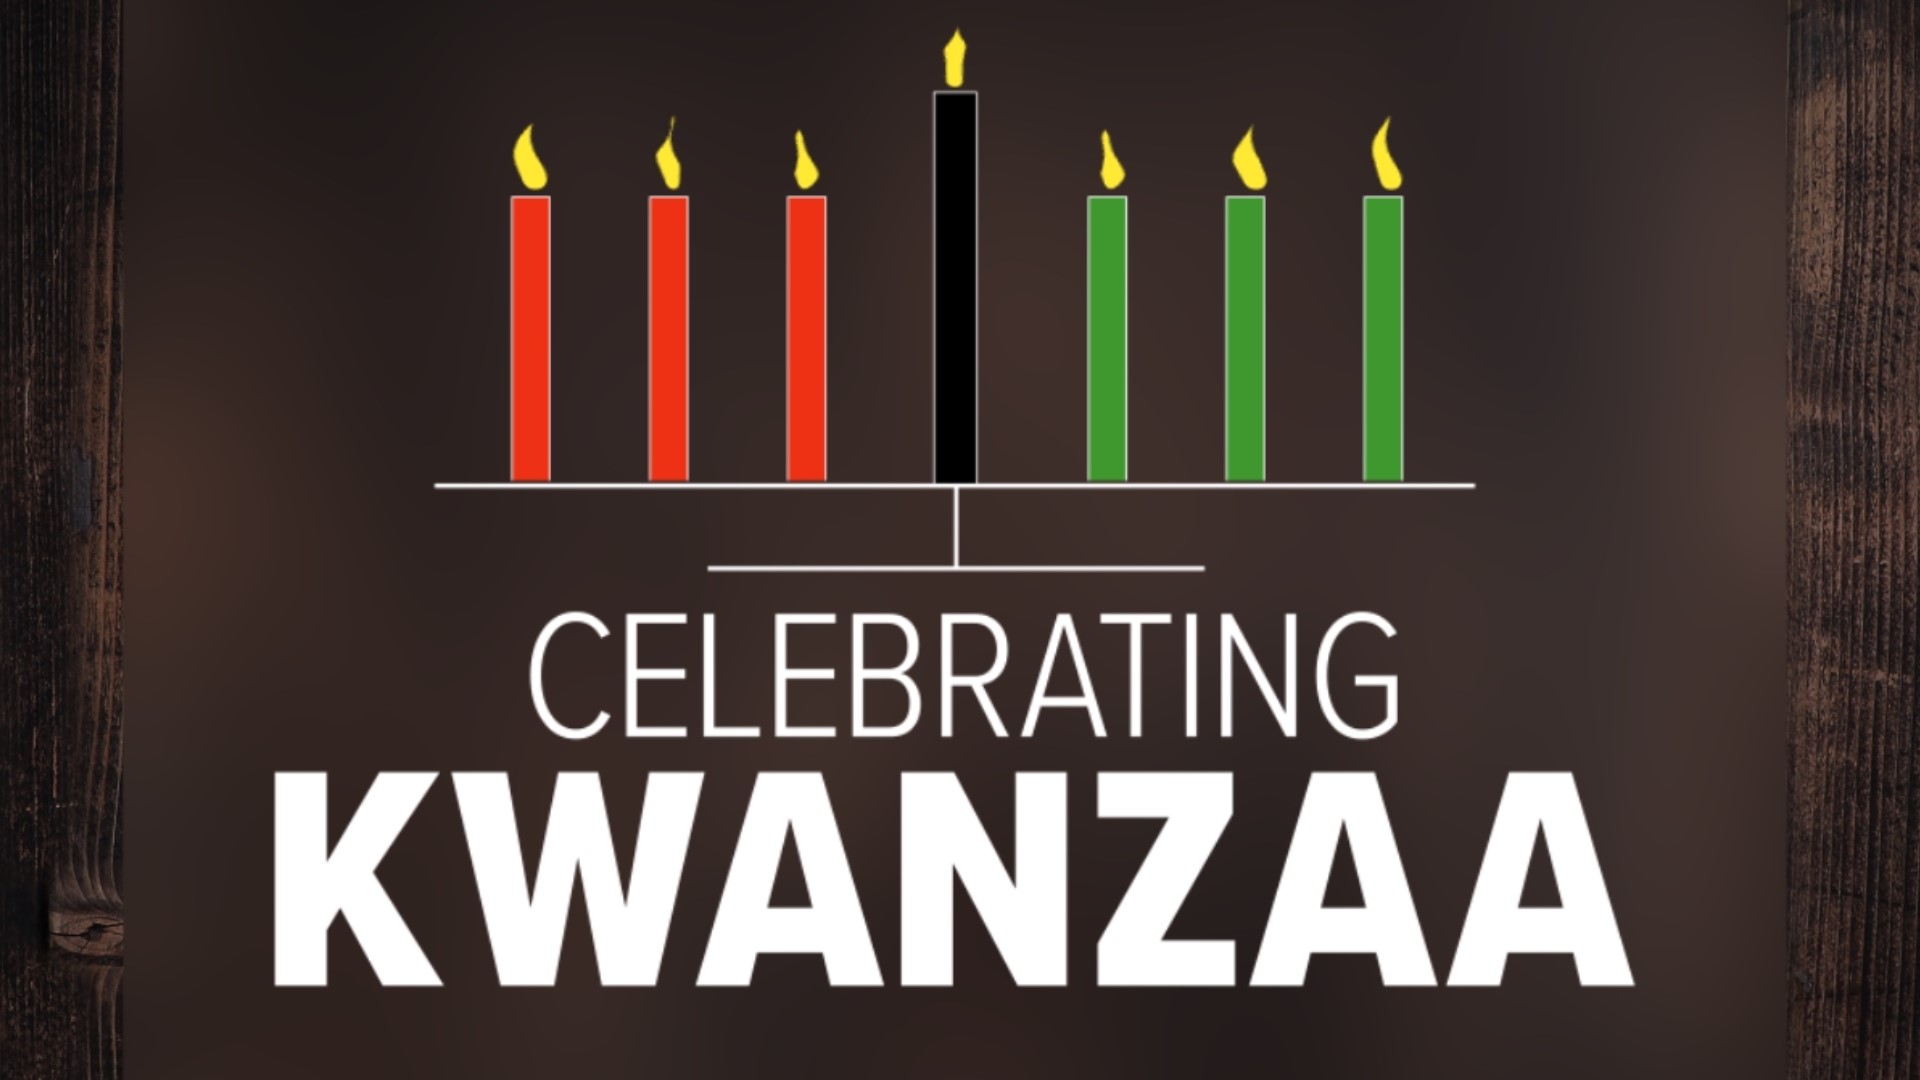 Although Kwanzaa is rich in African culture and heritage, the relatively new holiday didn't get its start overseas.